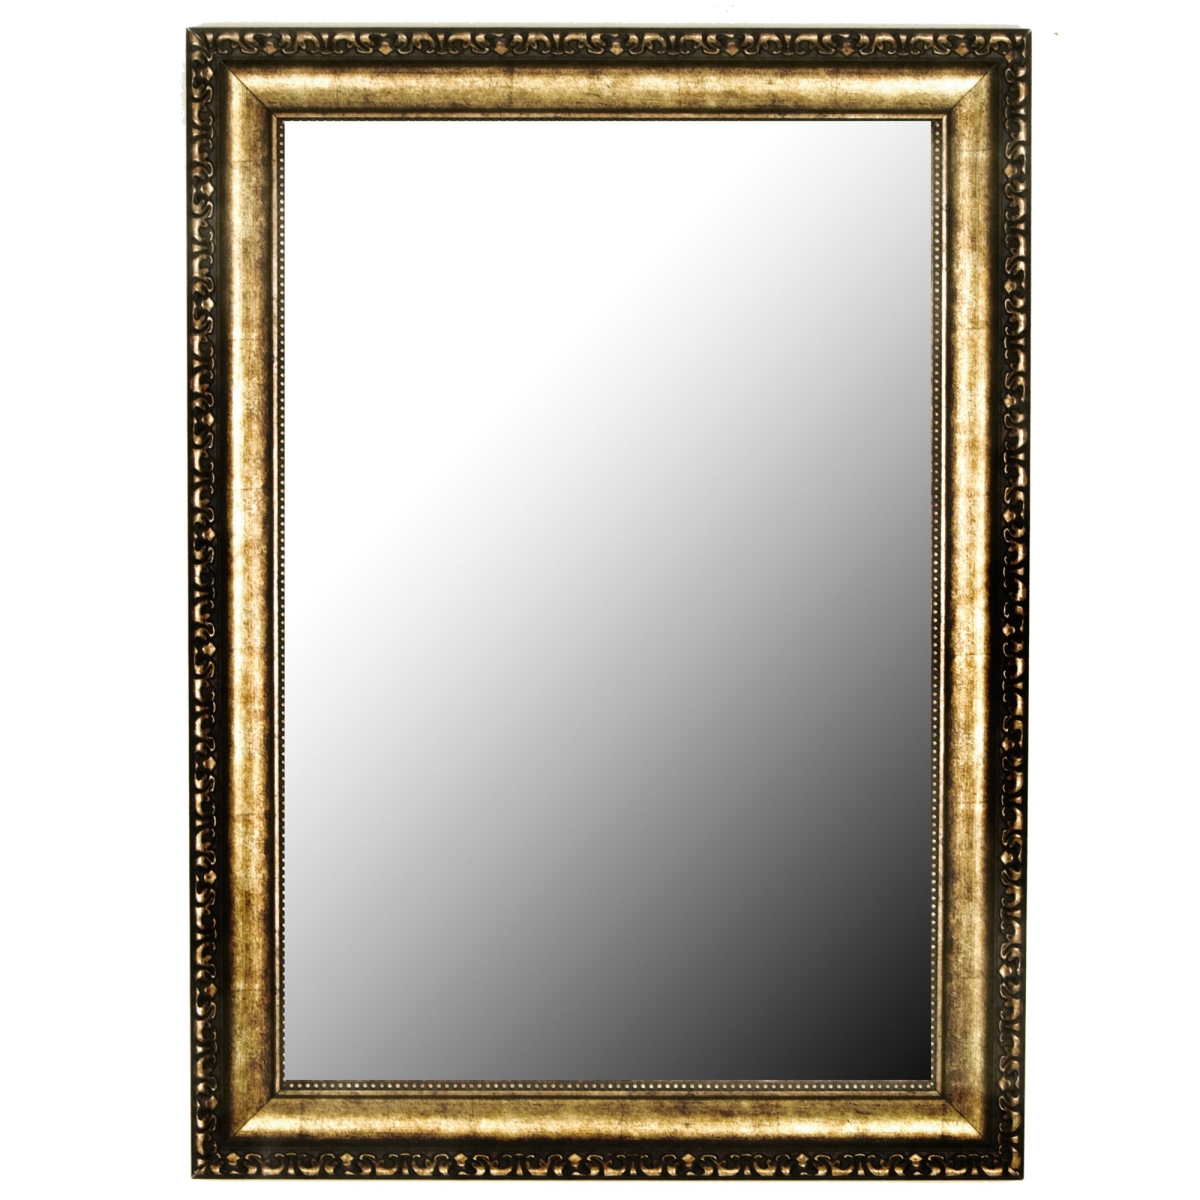 Hitchcock Butterfield 810701 Gold Lavonne Wall Mirror - 24.25 X 60.25 In.